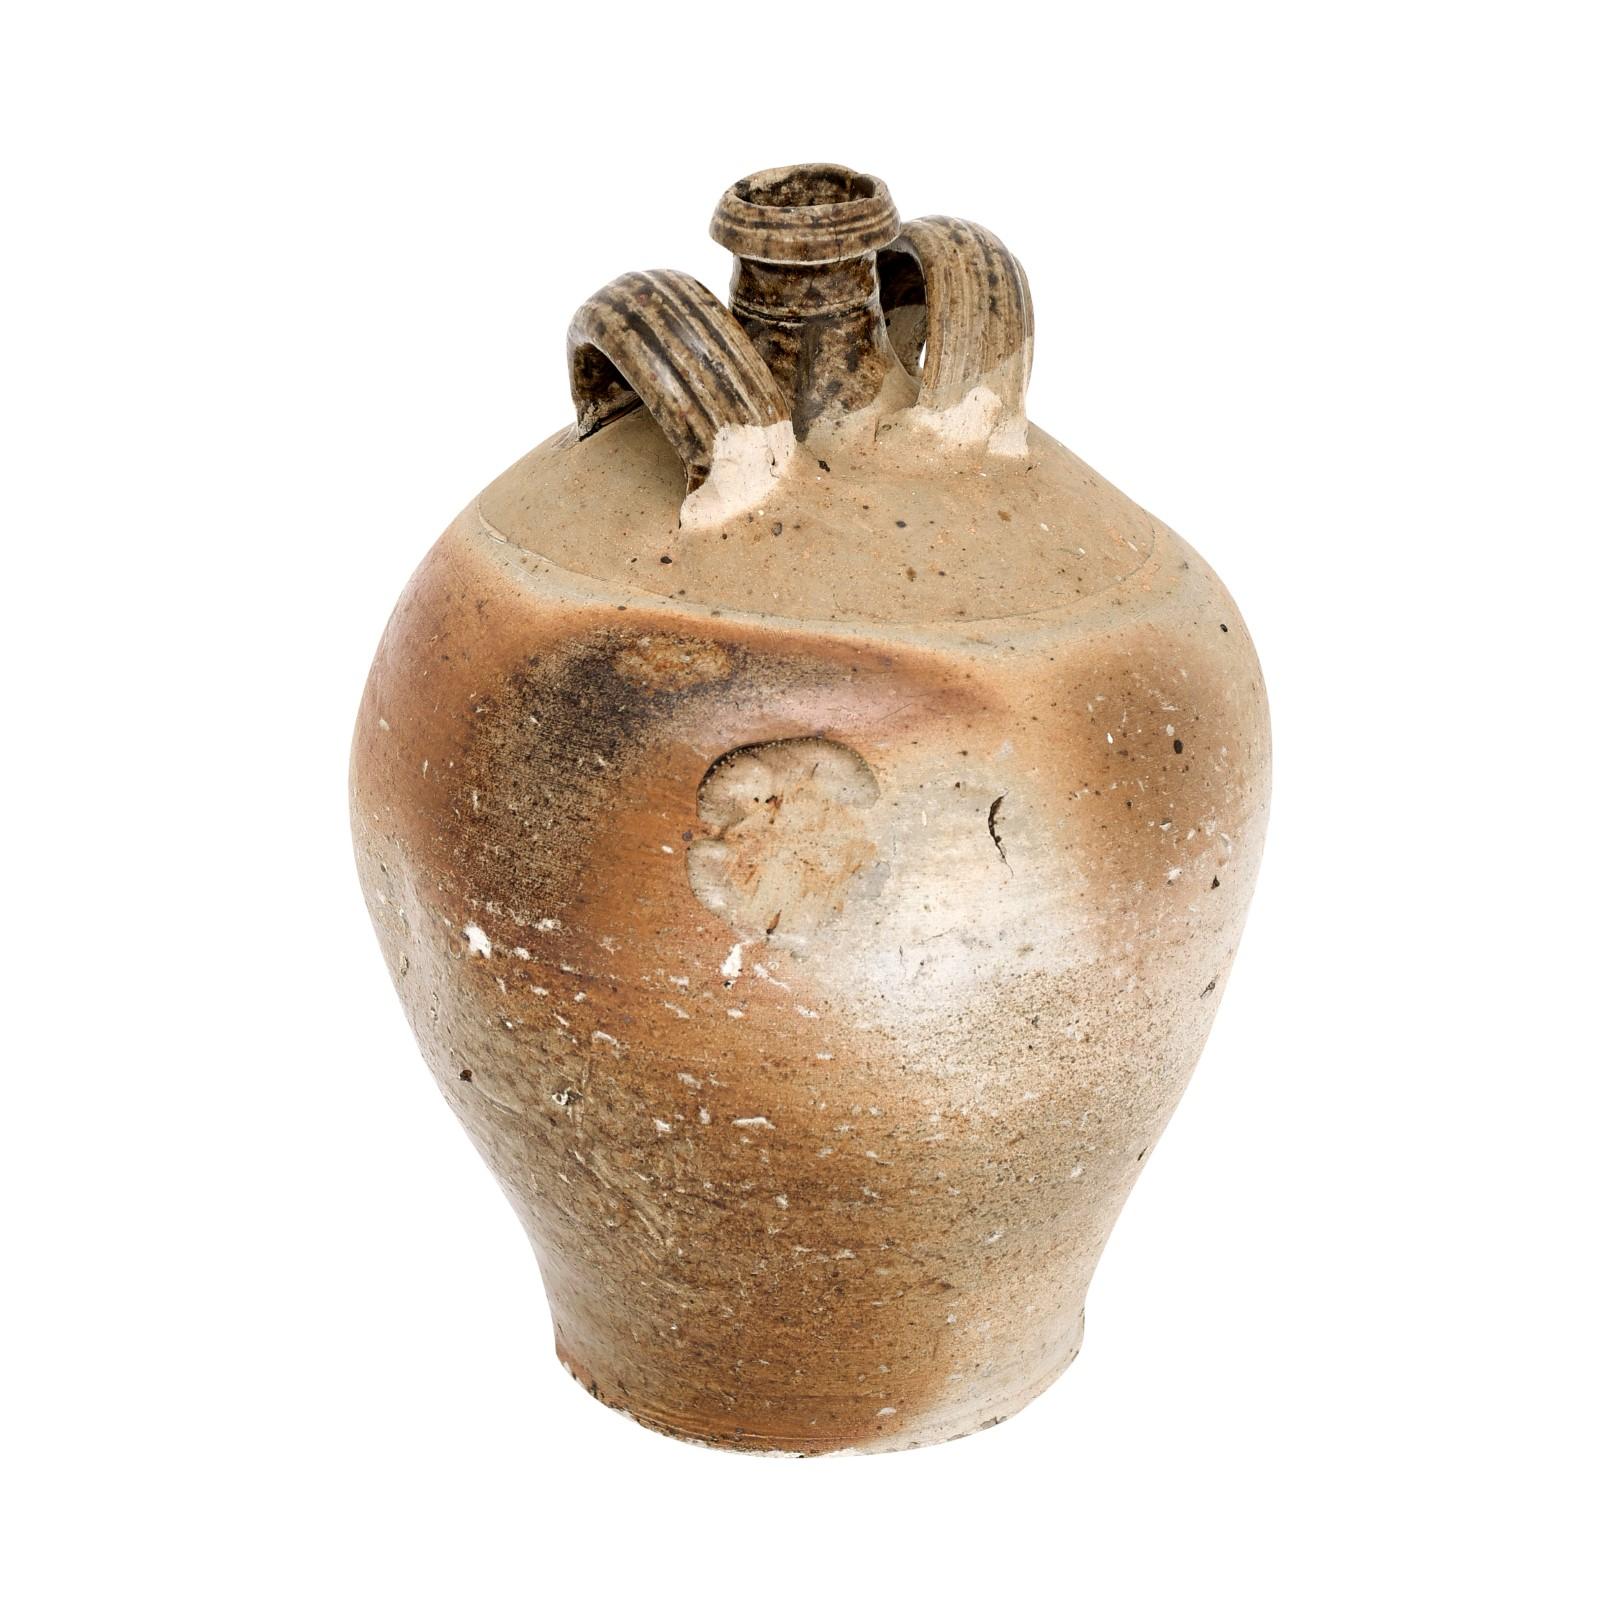 A French rustic double handled jug from the 19th century, possibly from Normandy. Indulge in the charm of French pastoral life with this rustic double-handled jug hailing from the 19th century, likely originating from the heartland of Normandy. This